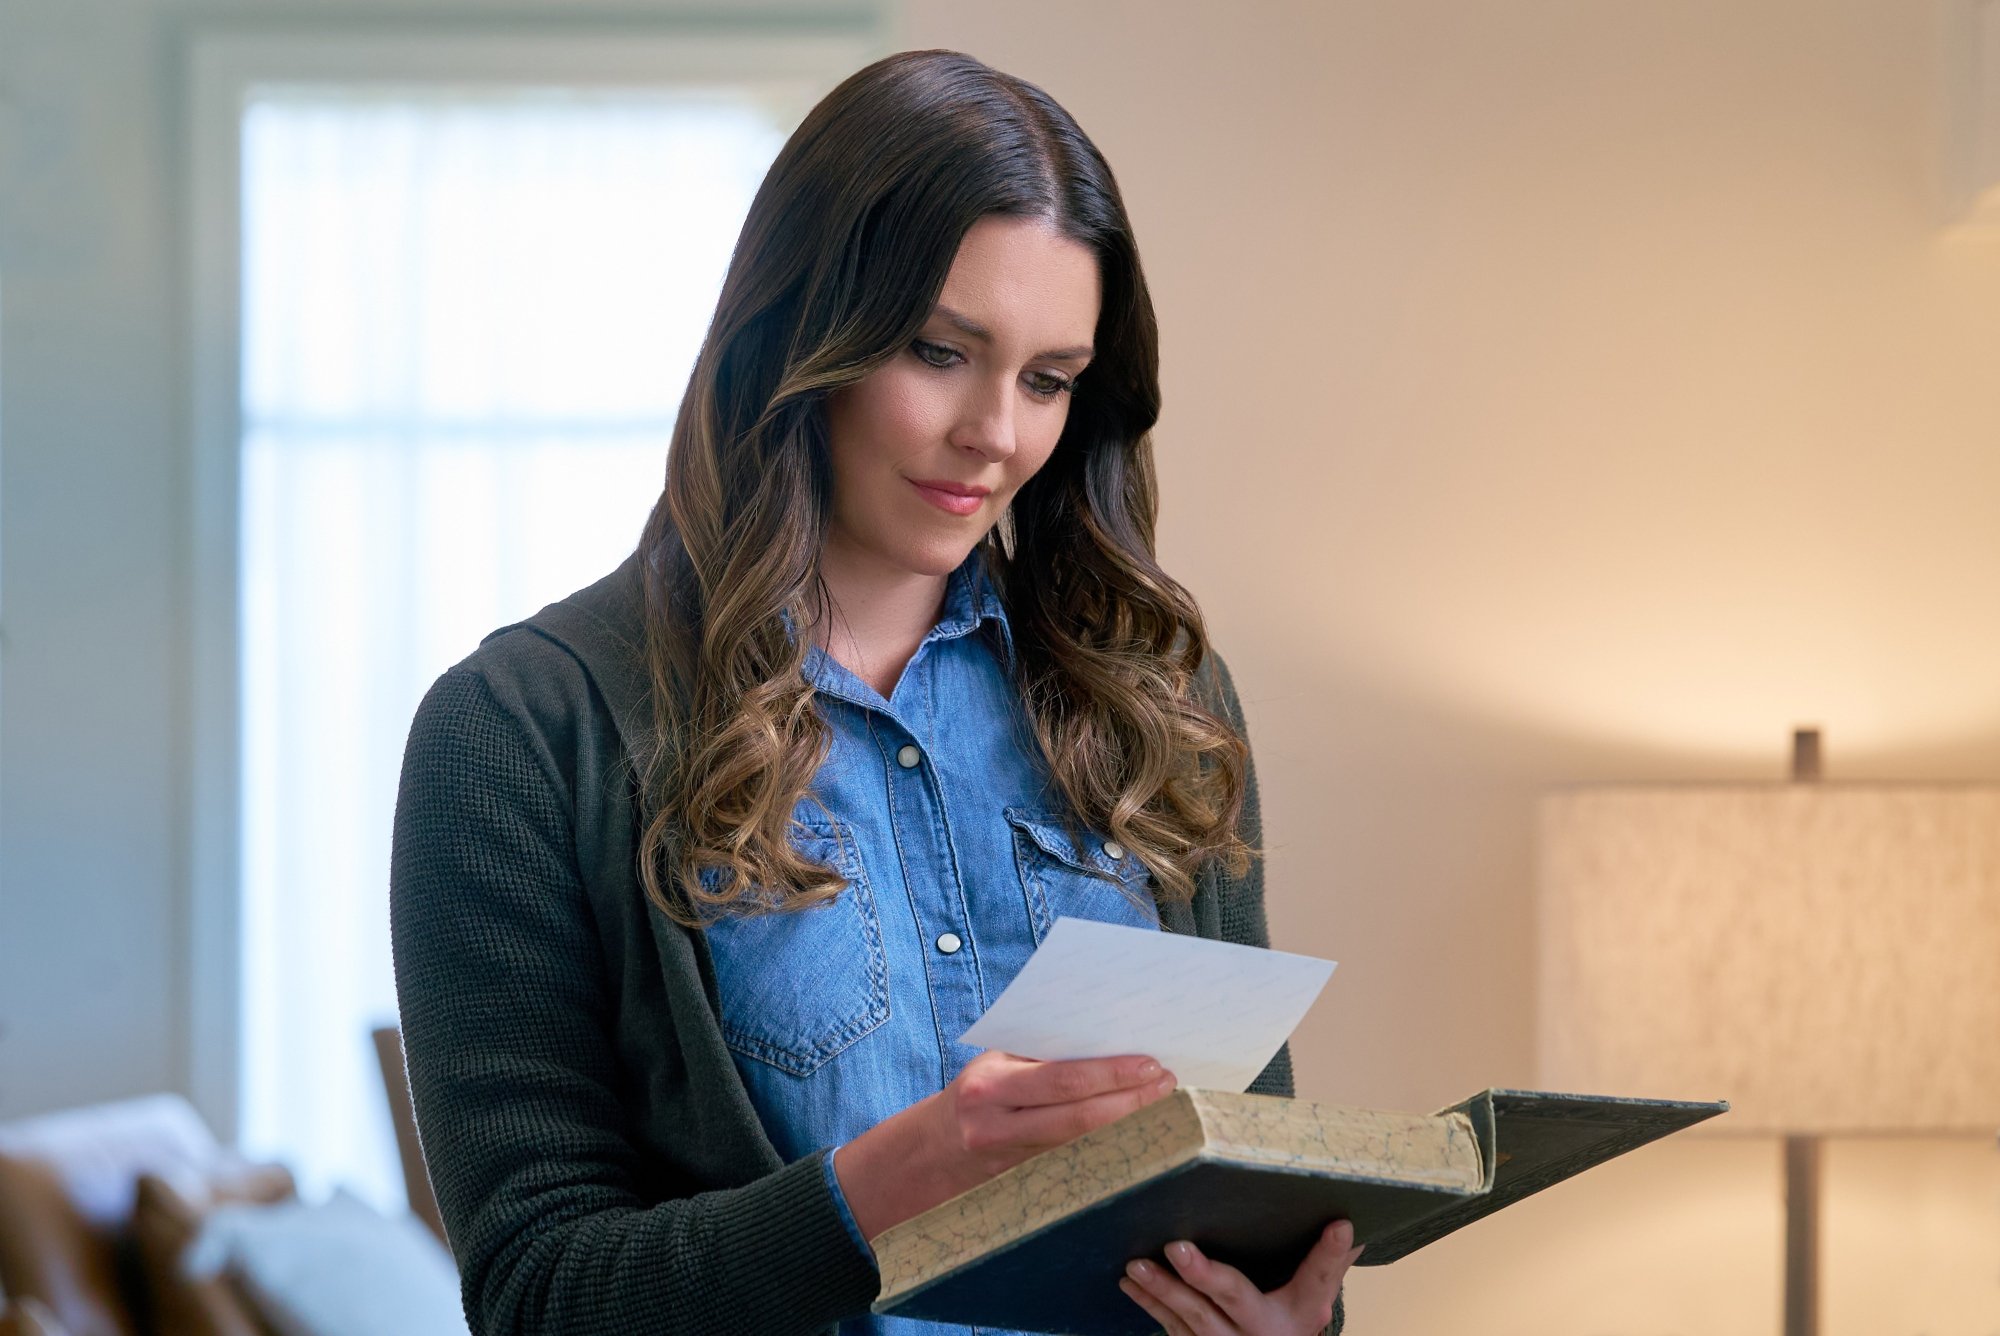 Hallmark's 'Pumpkin Everything' Taylor Cole as Amy wearing a denim-buttoned top. She's looking at a piece of paper she pulled from an open book.